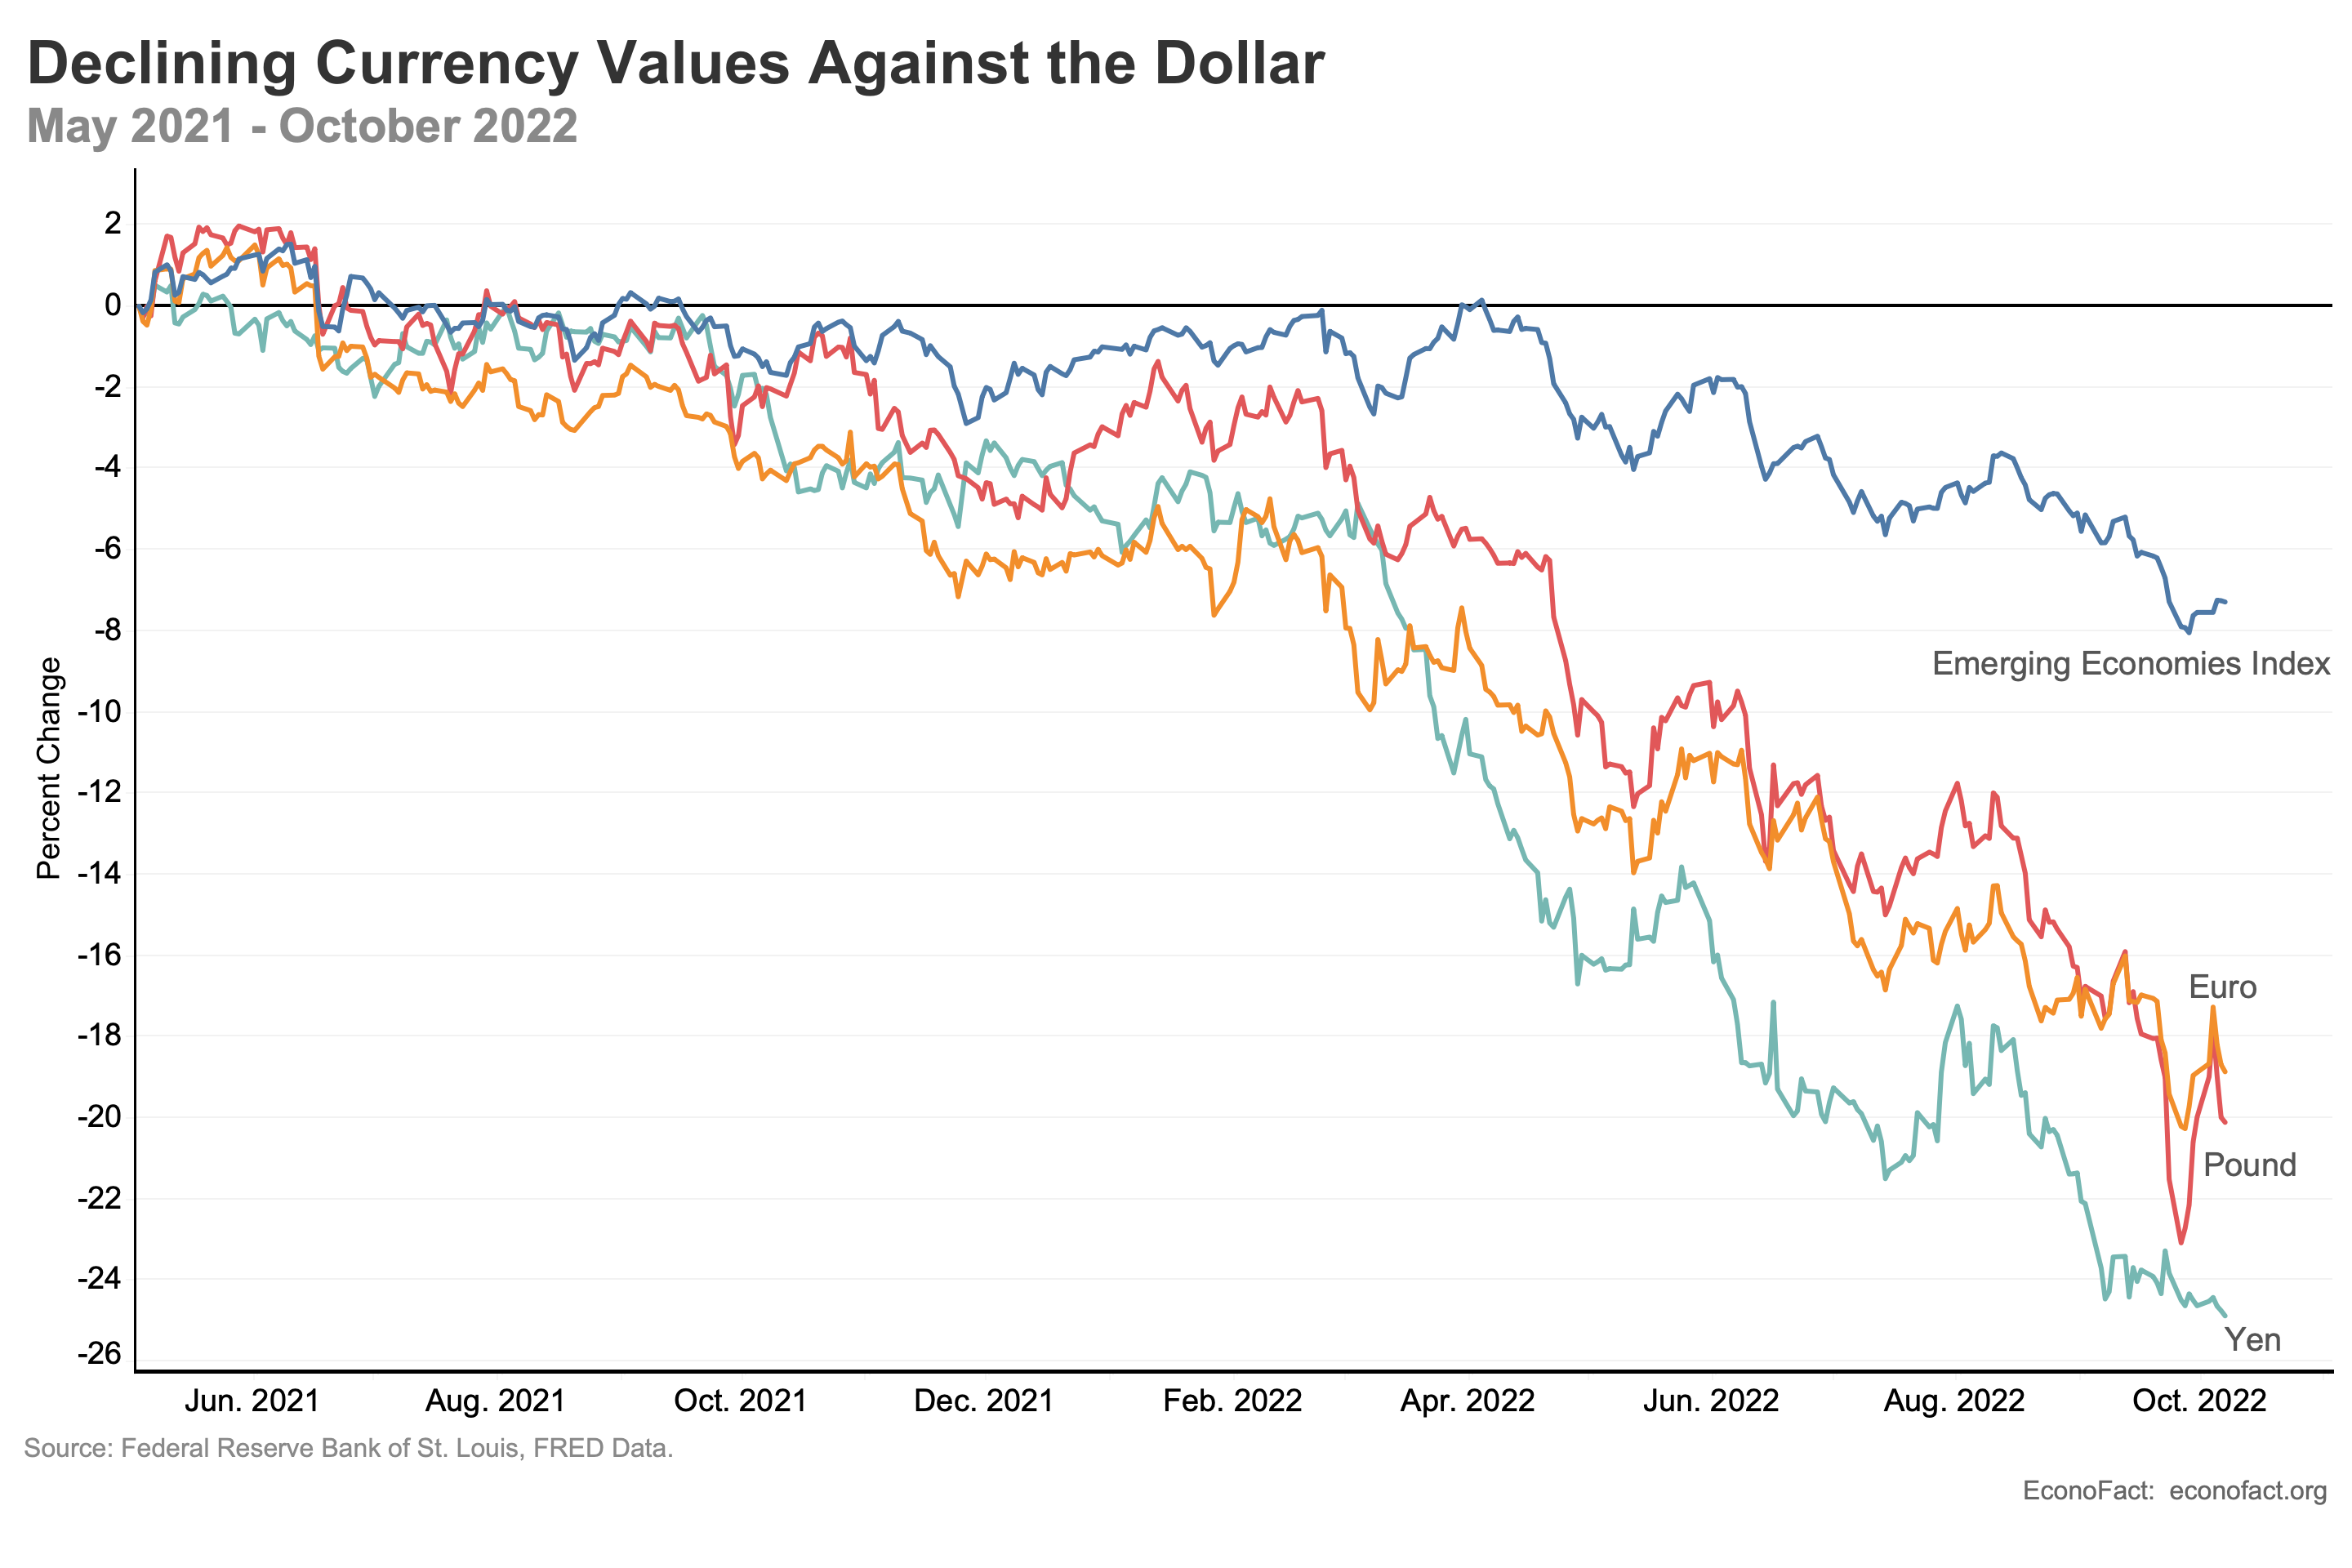 Since May of 2021, the value of the euro with respect to the dollar has weakened by 19 percent, the British pound by 20 percent, and the Japanese yen by 25 percent. There has been a similar, albeit smaller, strengthening of the dollar against the currencies of emerging markets